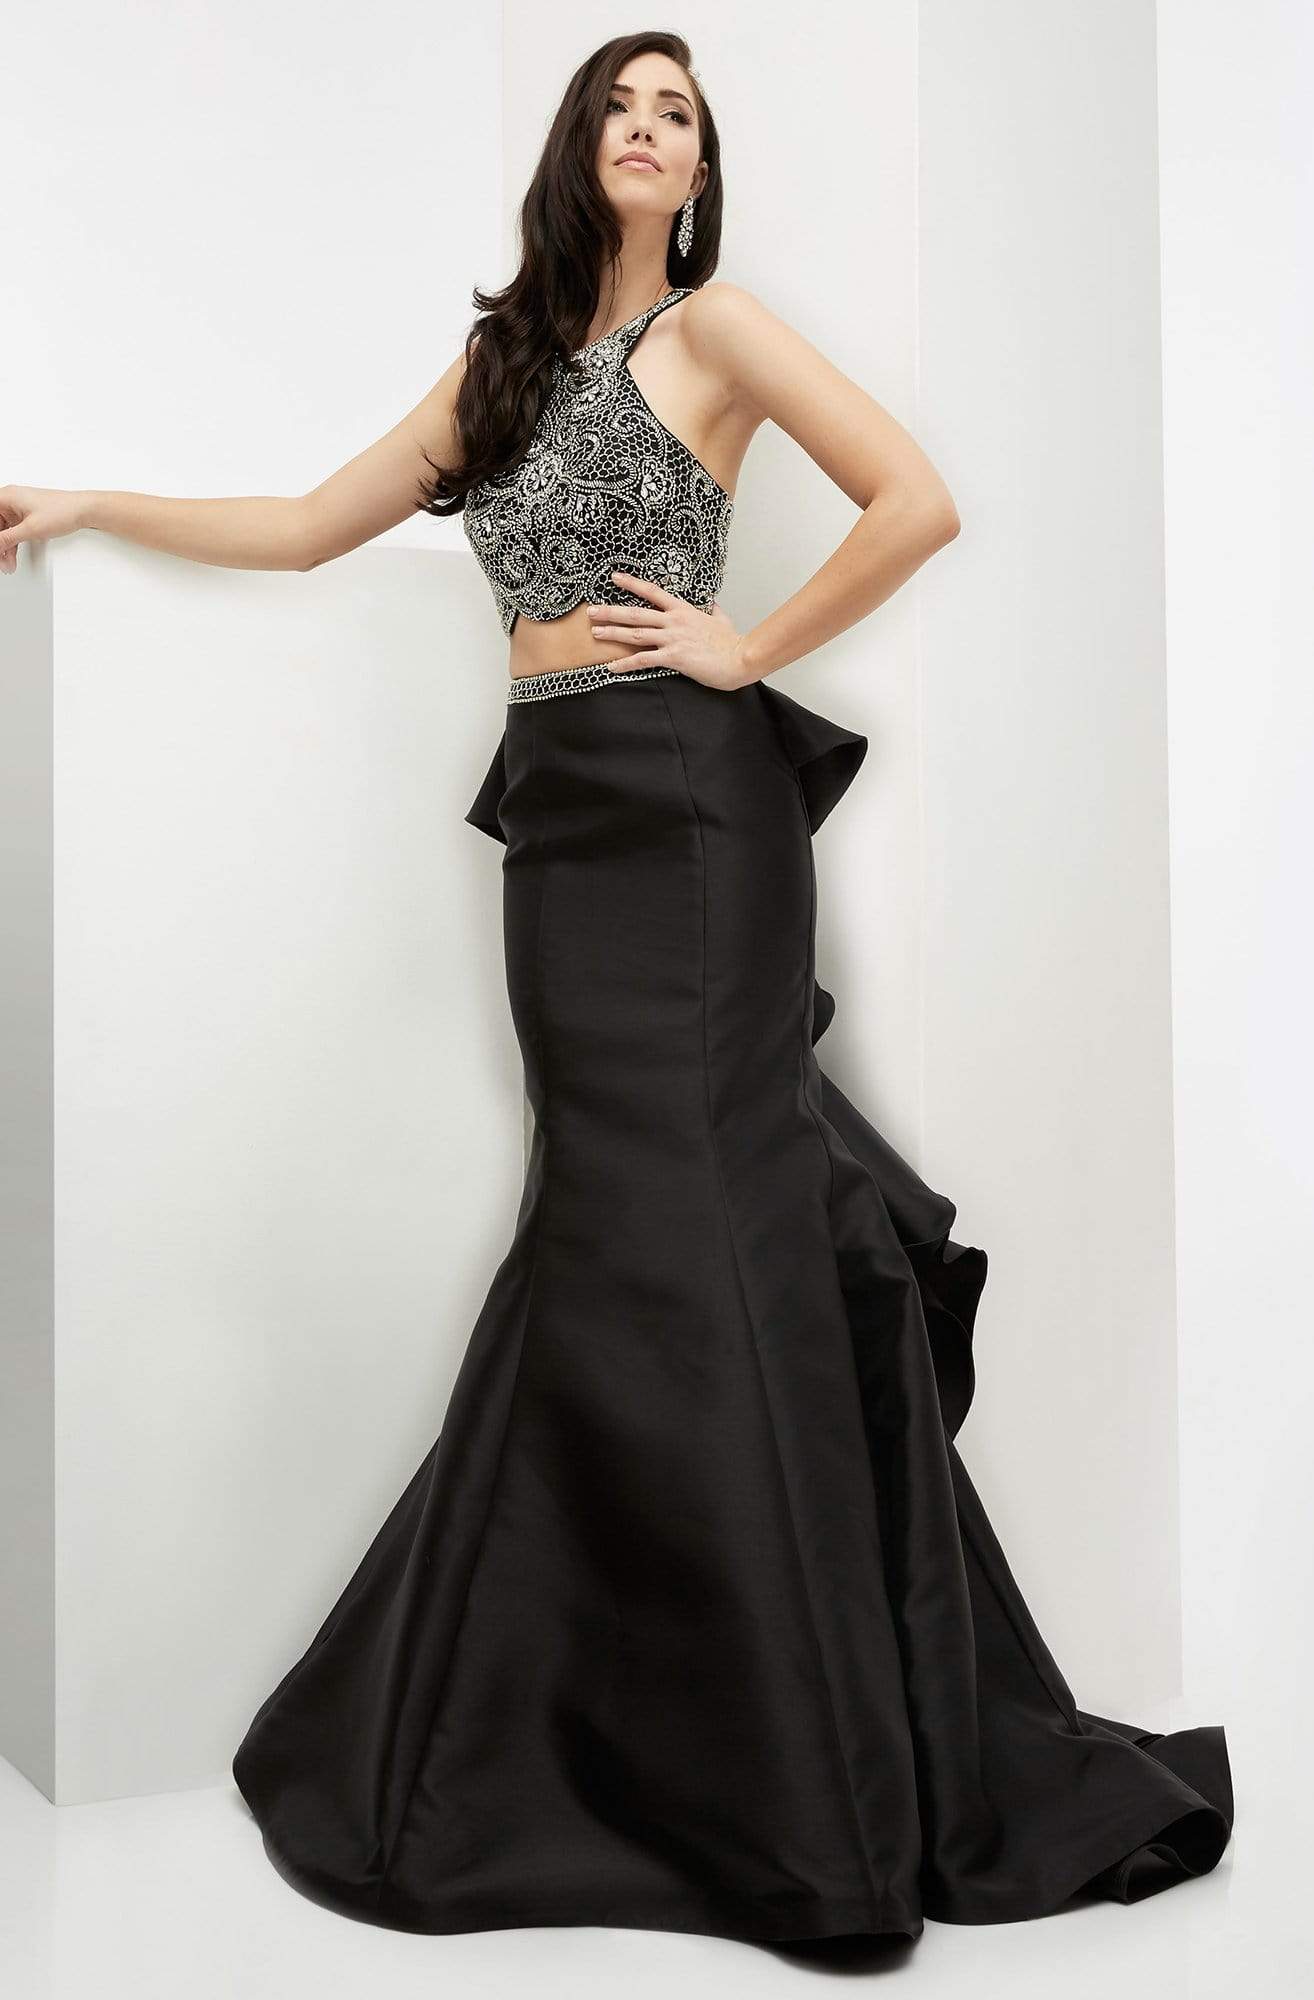 Image of Jasz Couture - Ruffled Panel Trumpet Gown 5990